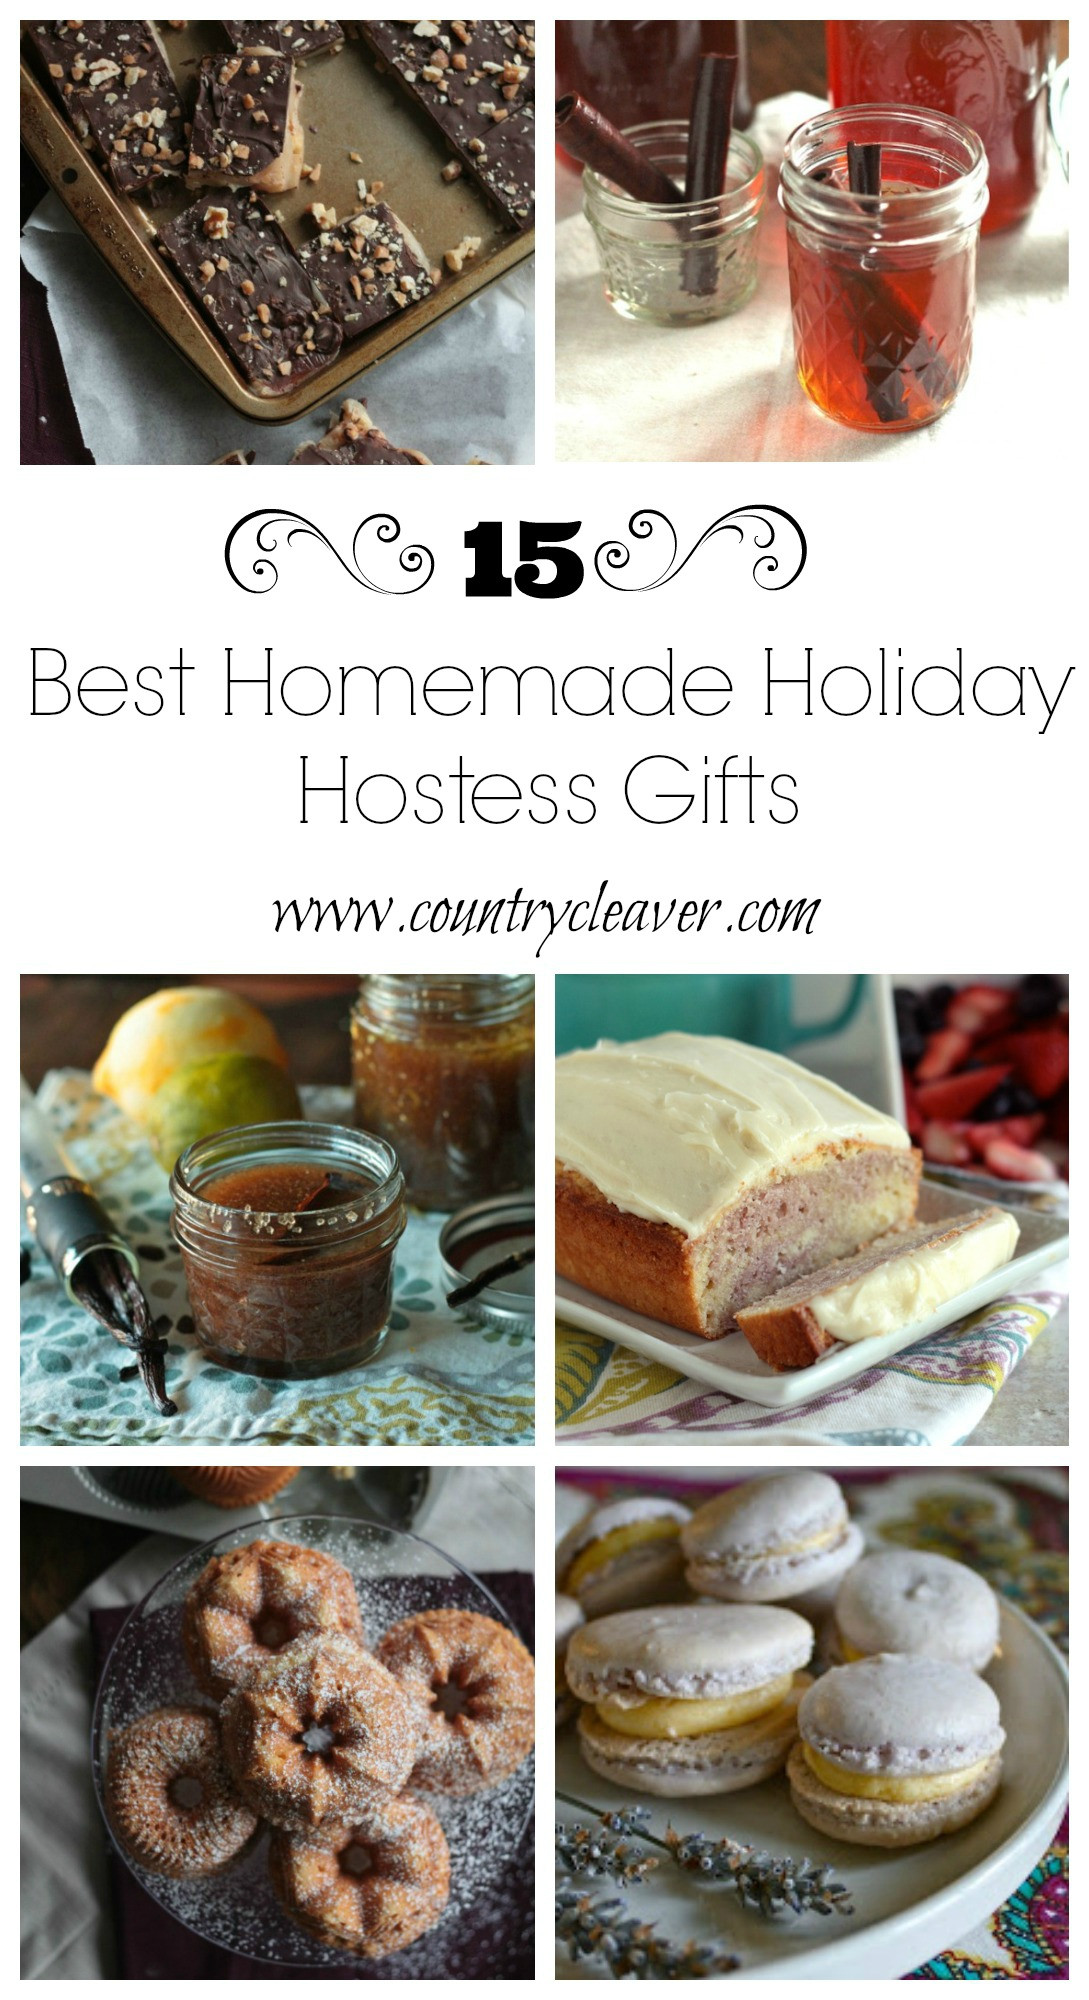 Holiday Party Gift Ideas For The Hostess
 15 Best Homemade Holiday Hostess Gifts Country Cleaver